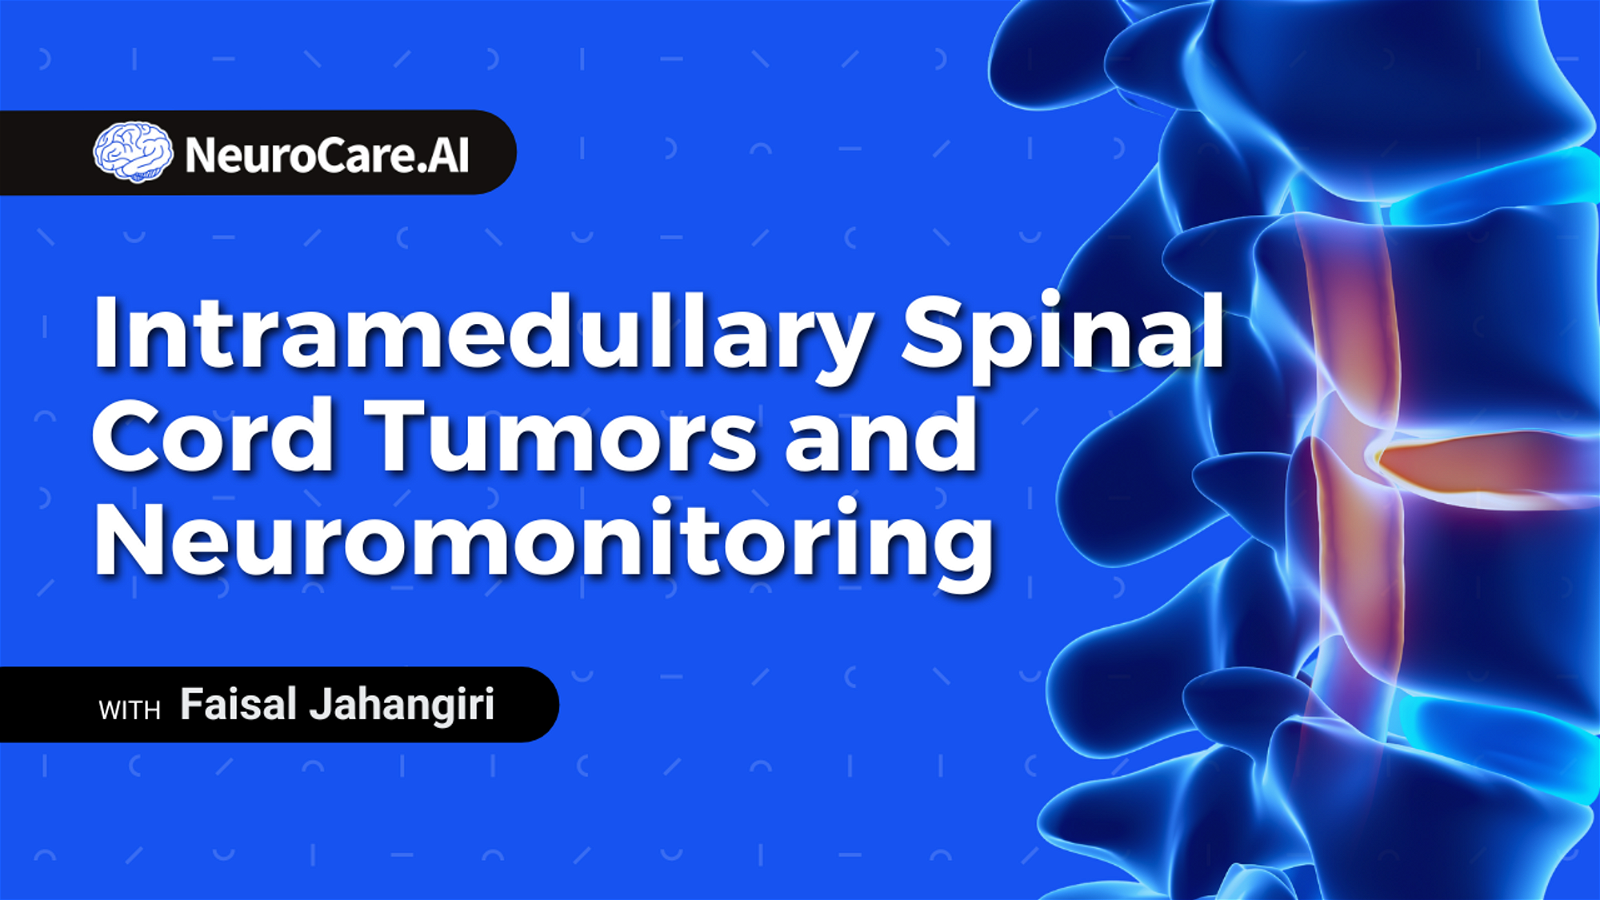 Intramedullary Spinal Cord Tumors and Neuromonitoring